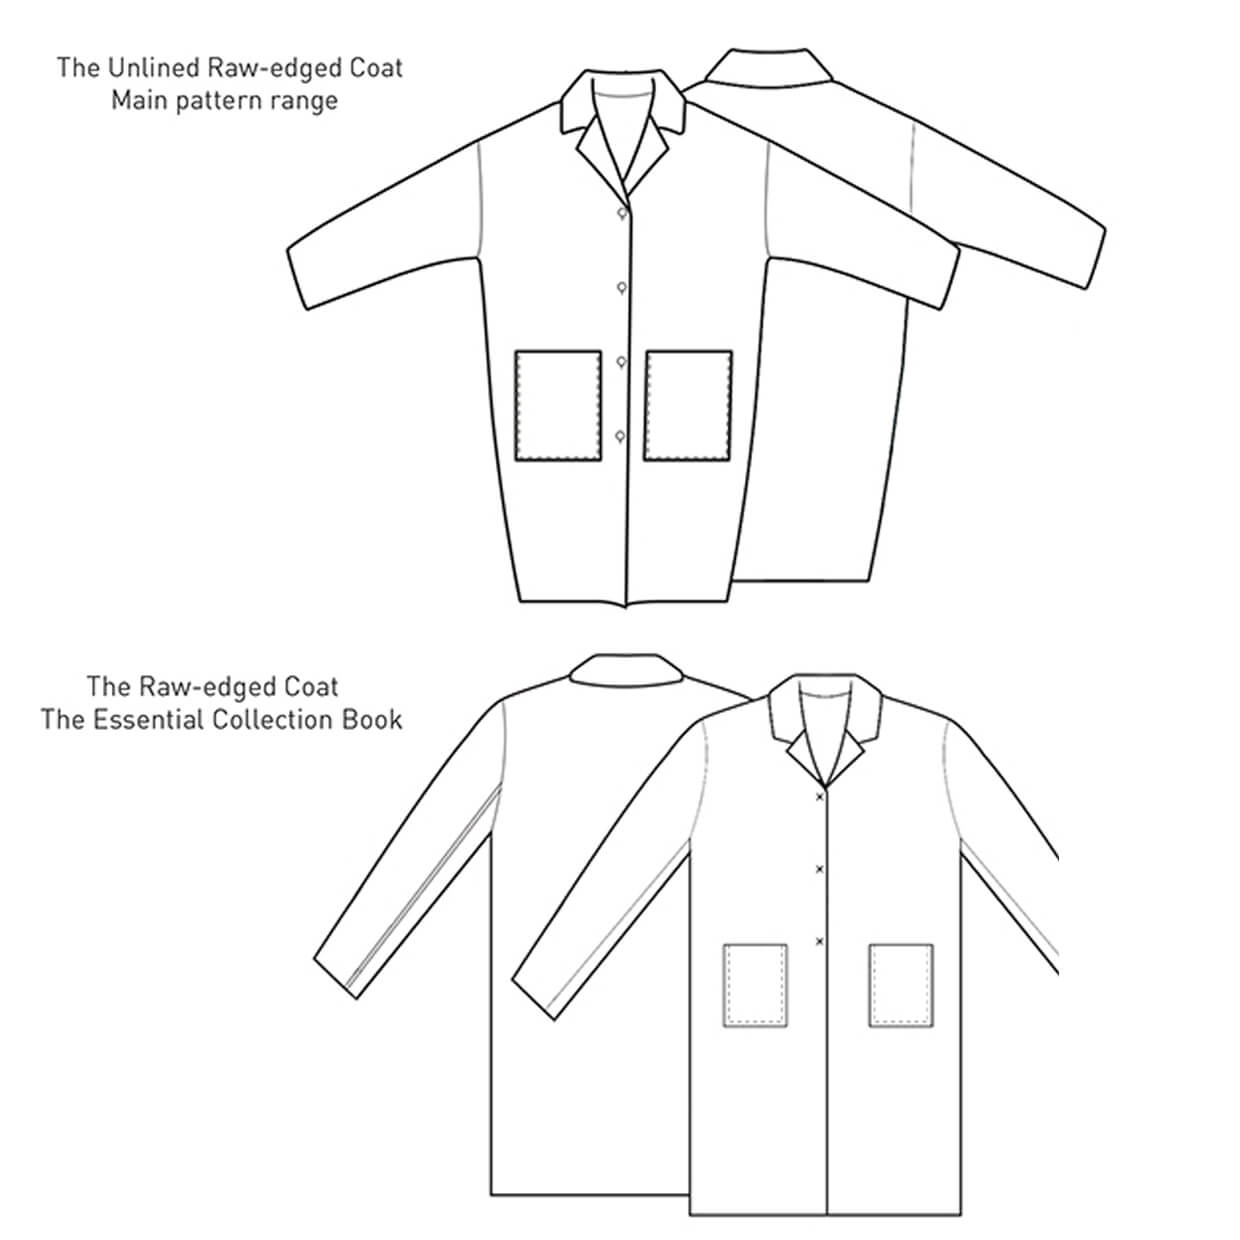 Designing The Unlined Raw-edged Coat